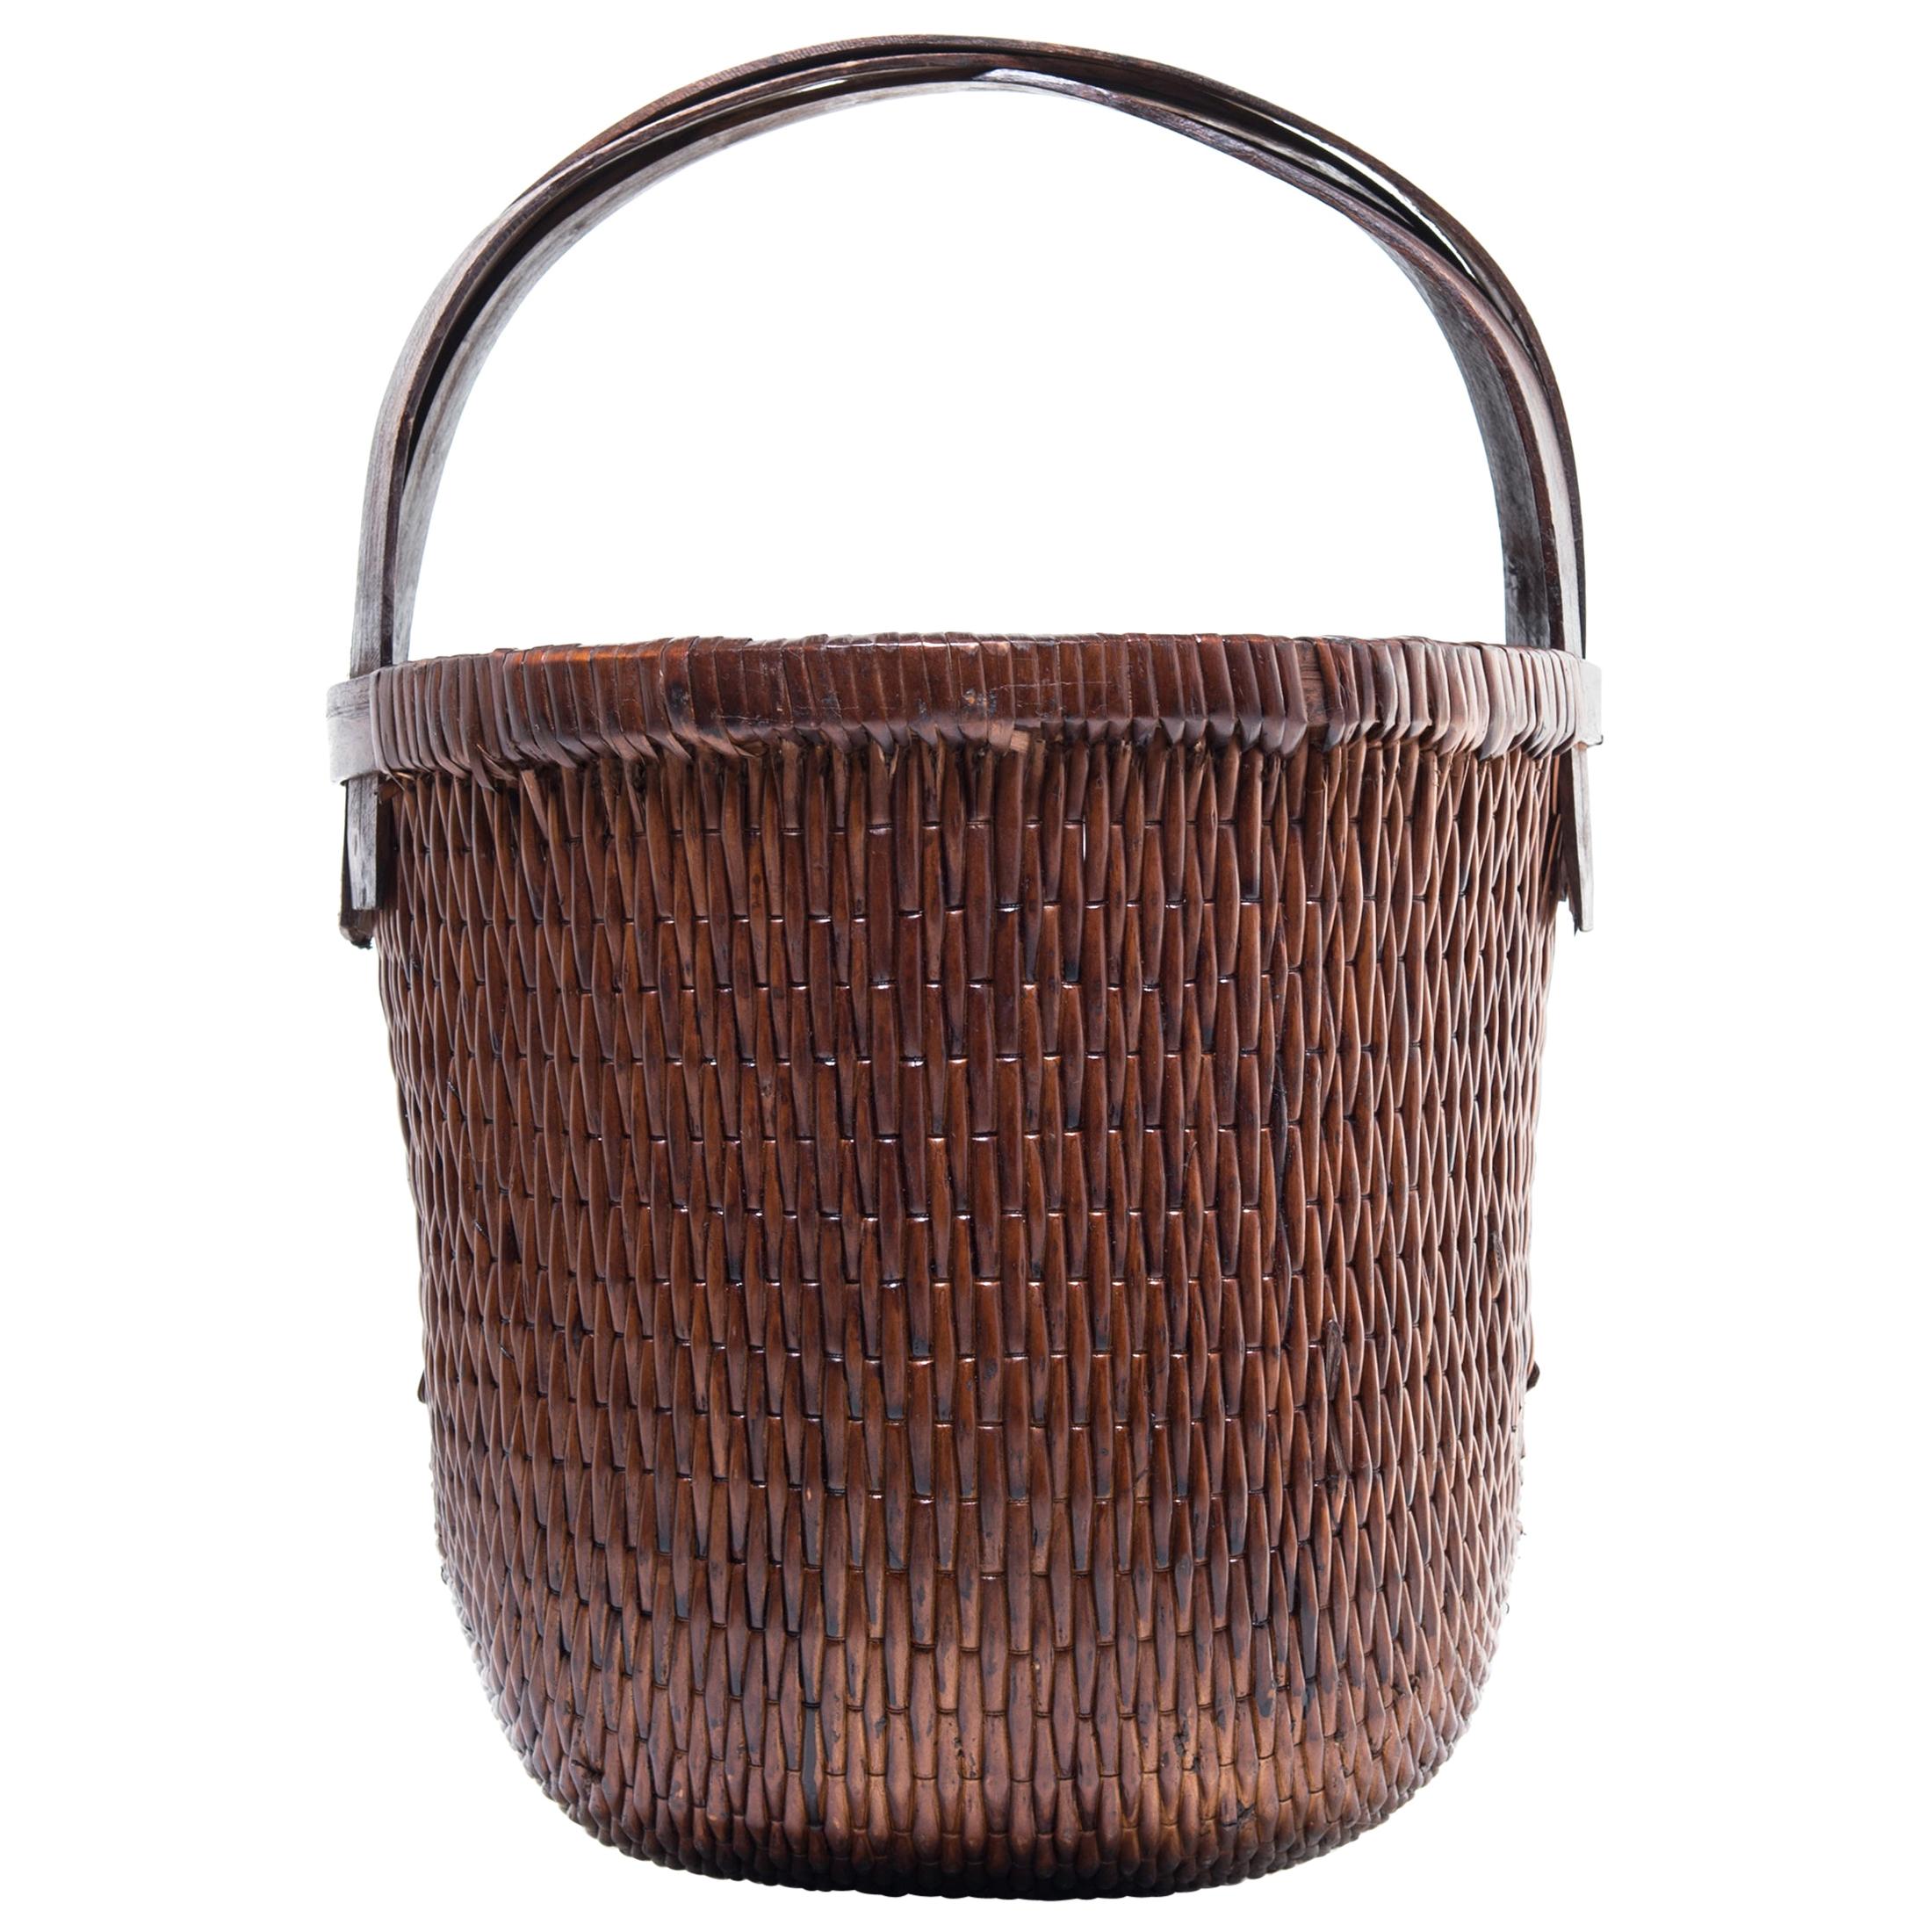 Chinese Bent Handle Willow Basket, c. 1900